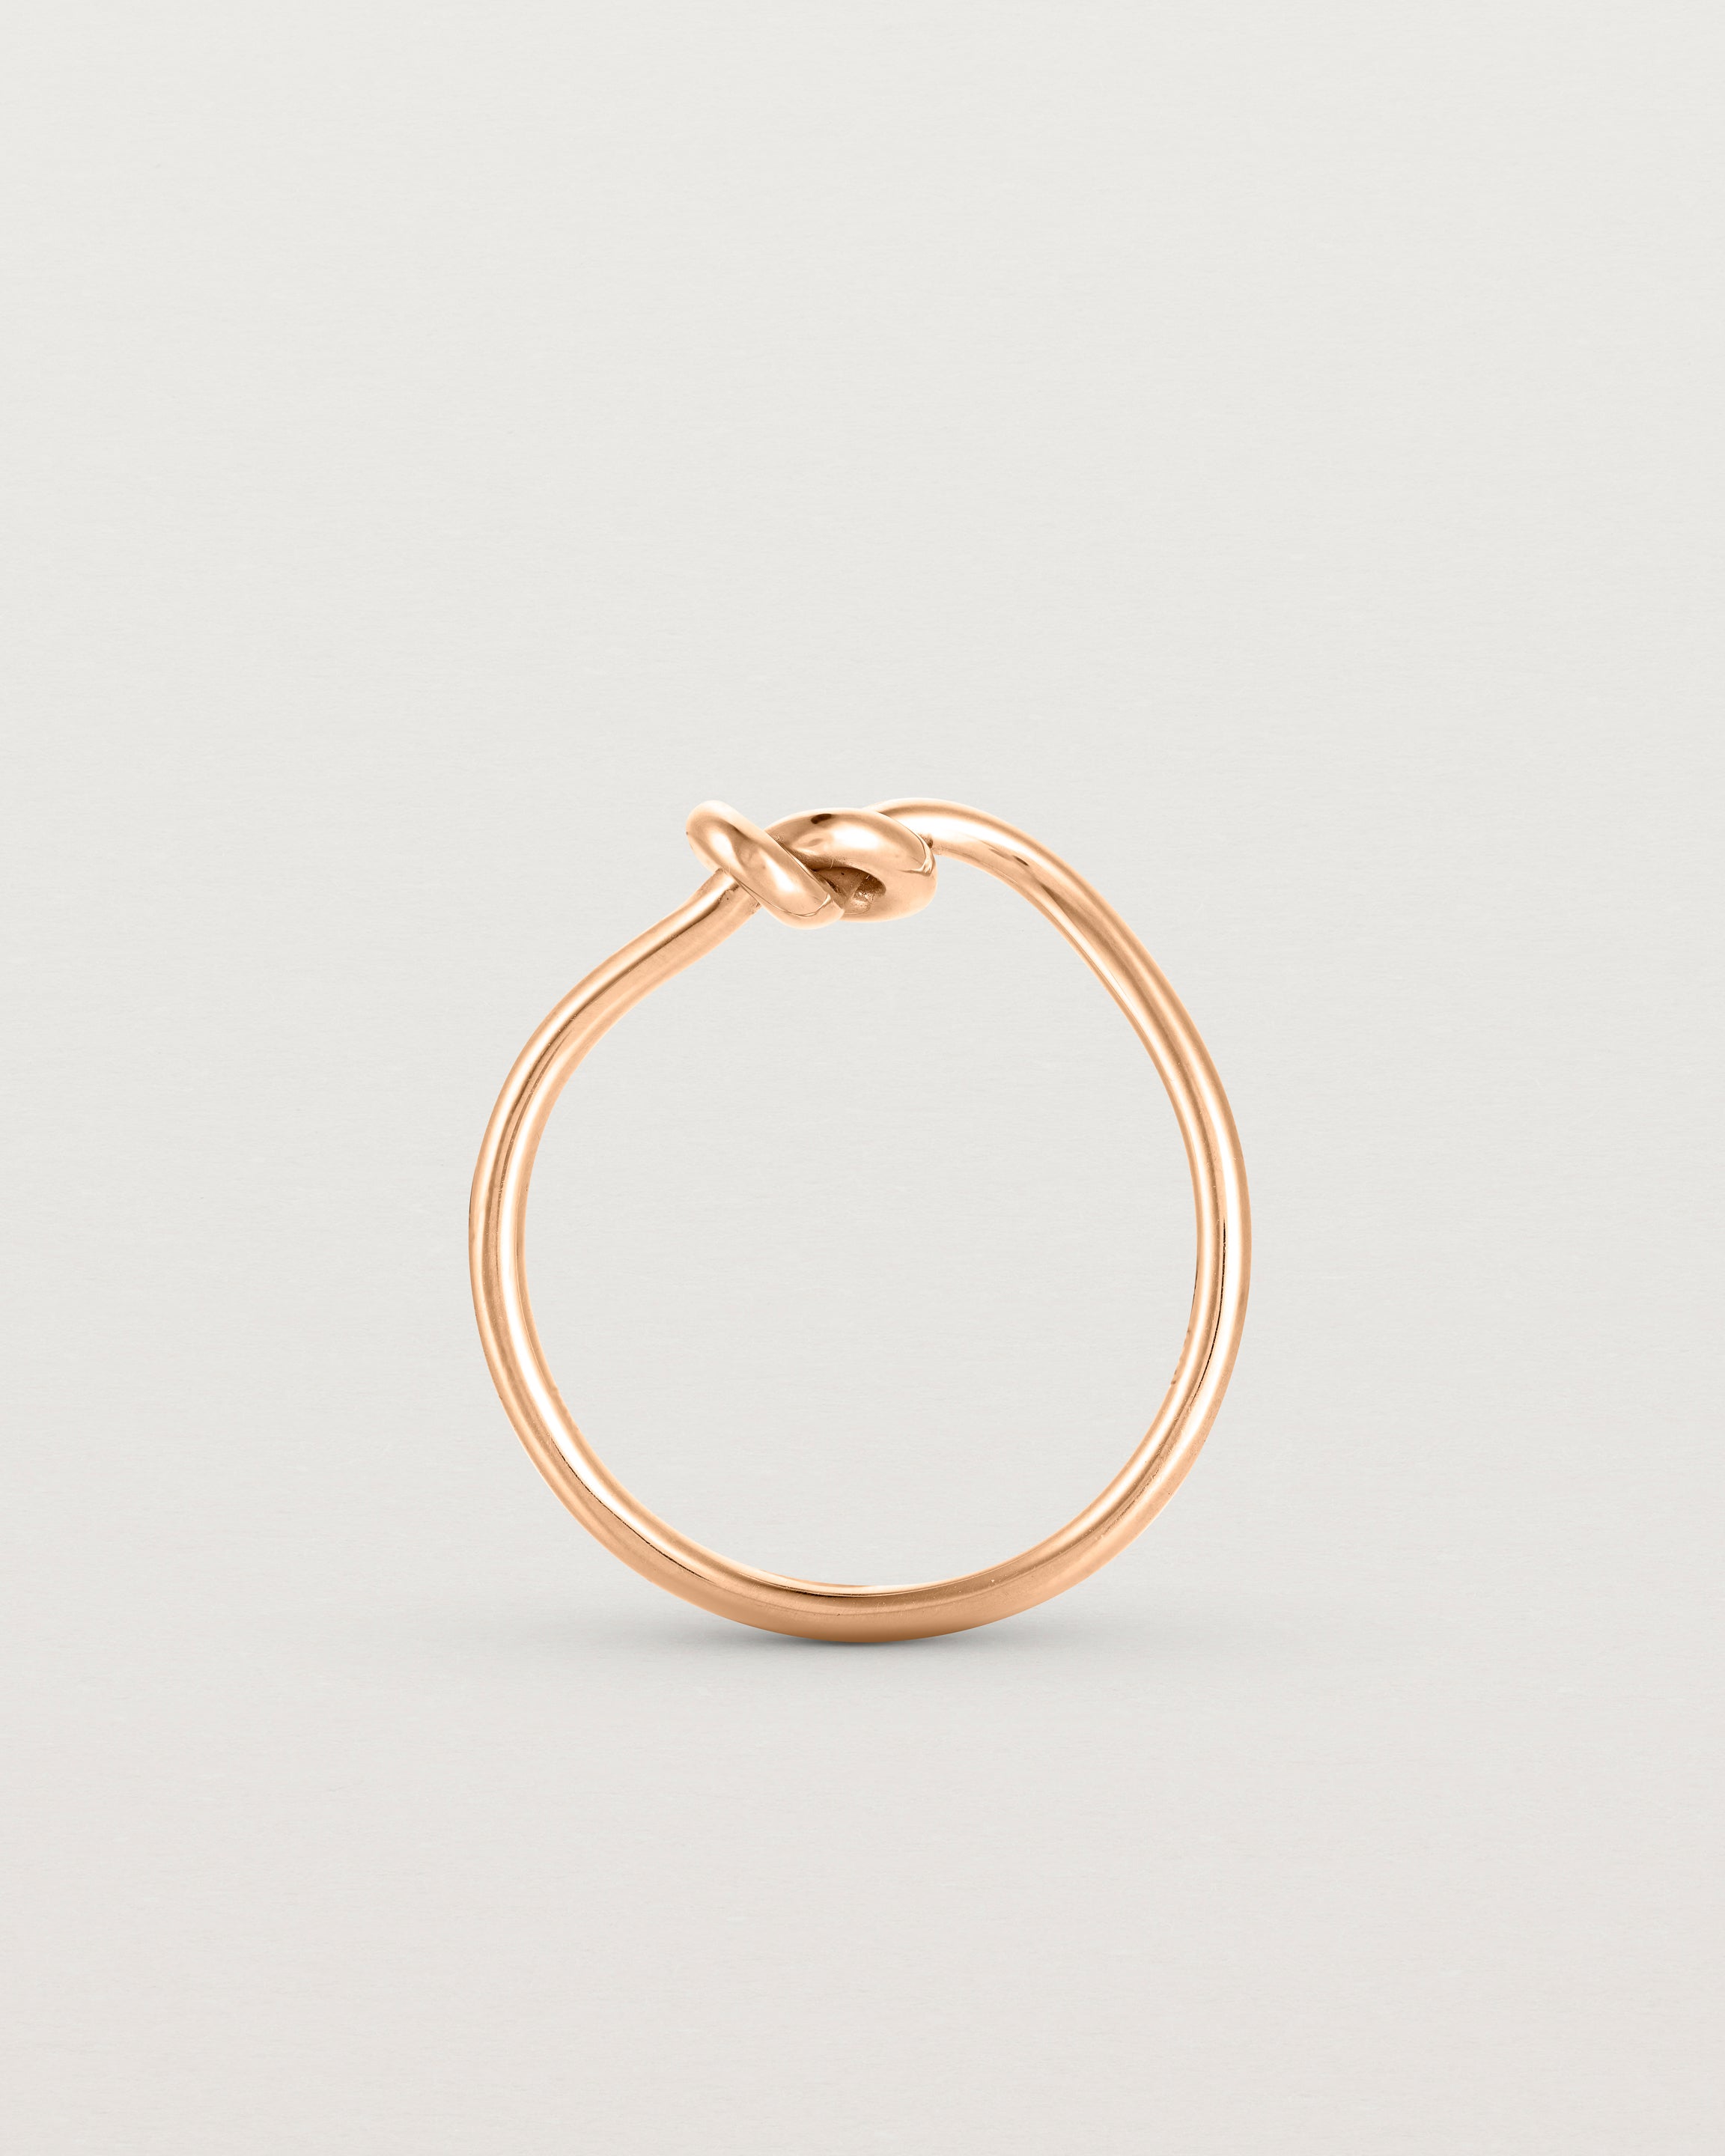 Standing view of the Cara Ring in rose gold.